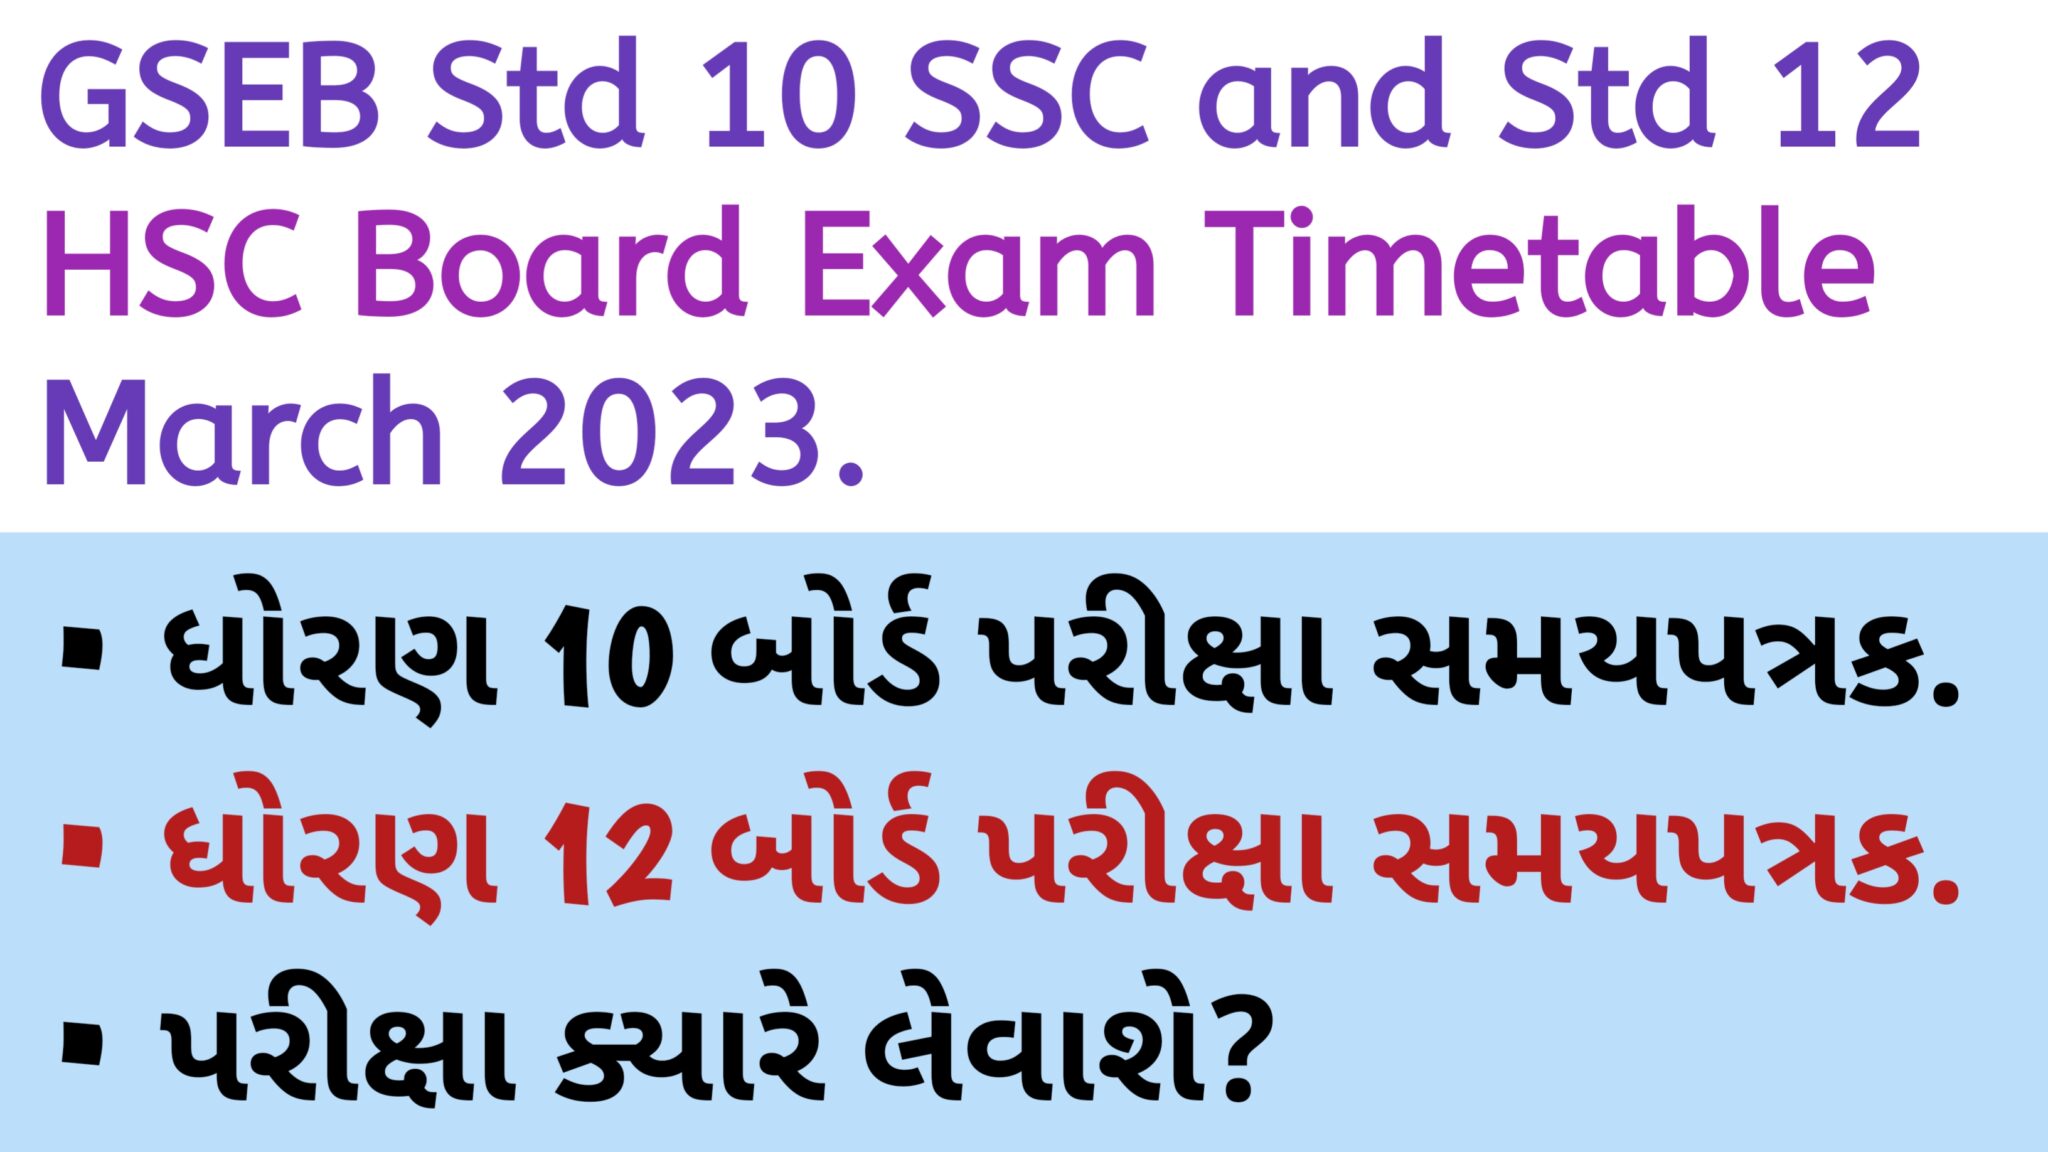 GSEB Std 10 SSC and Std 12 HSC Board Exam Timetable March 2023. » YOUTH